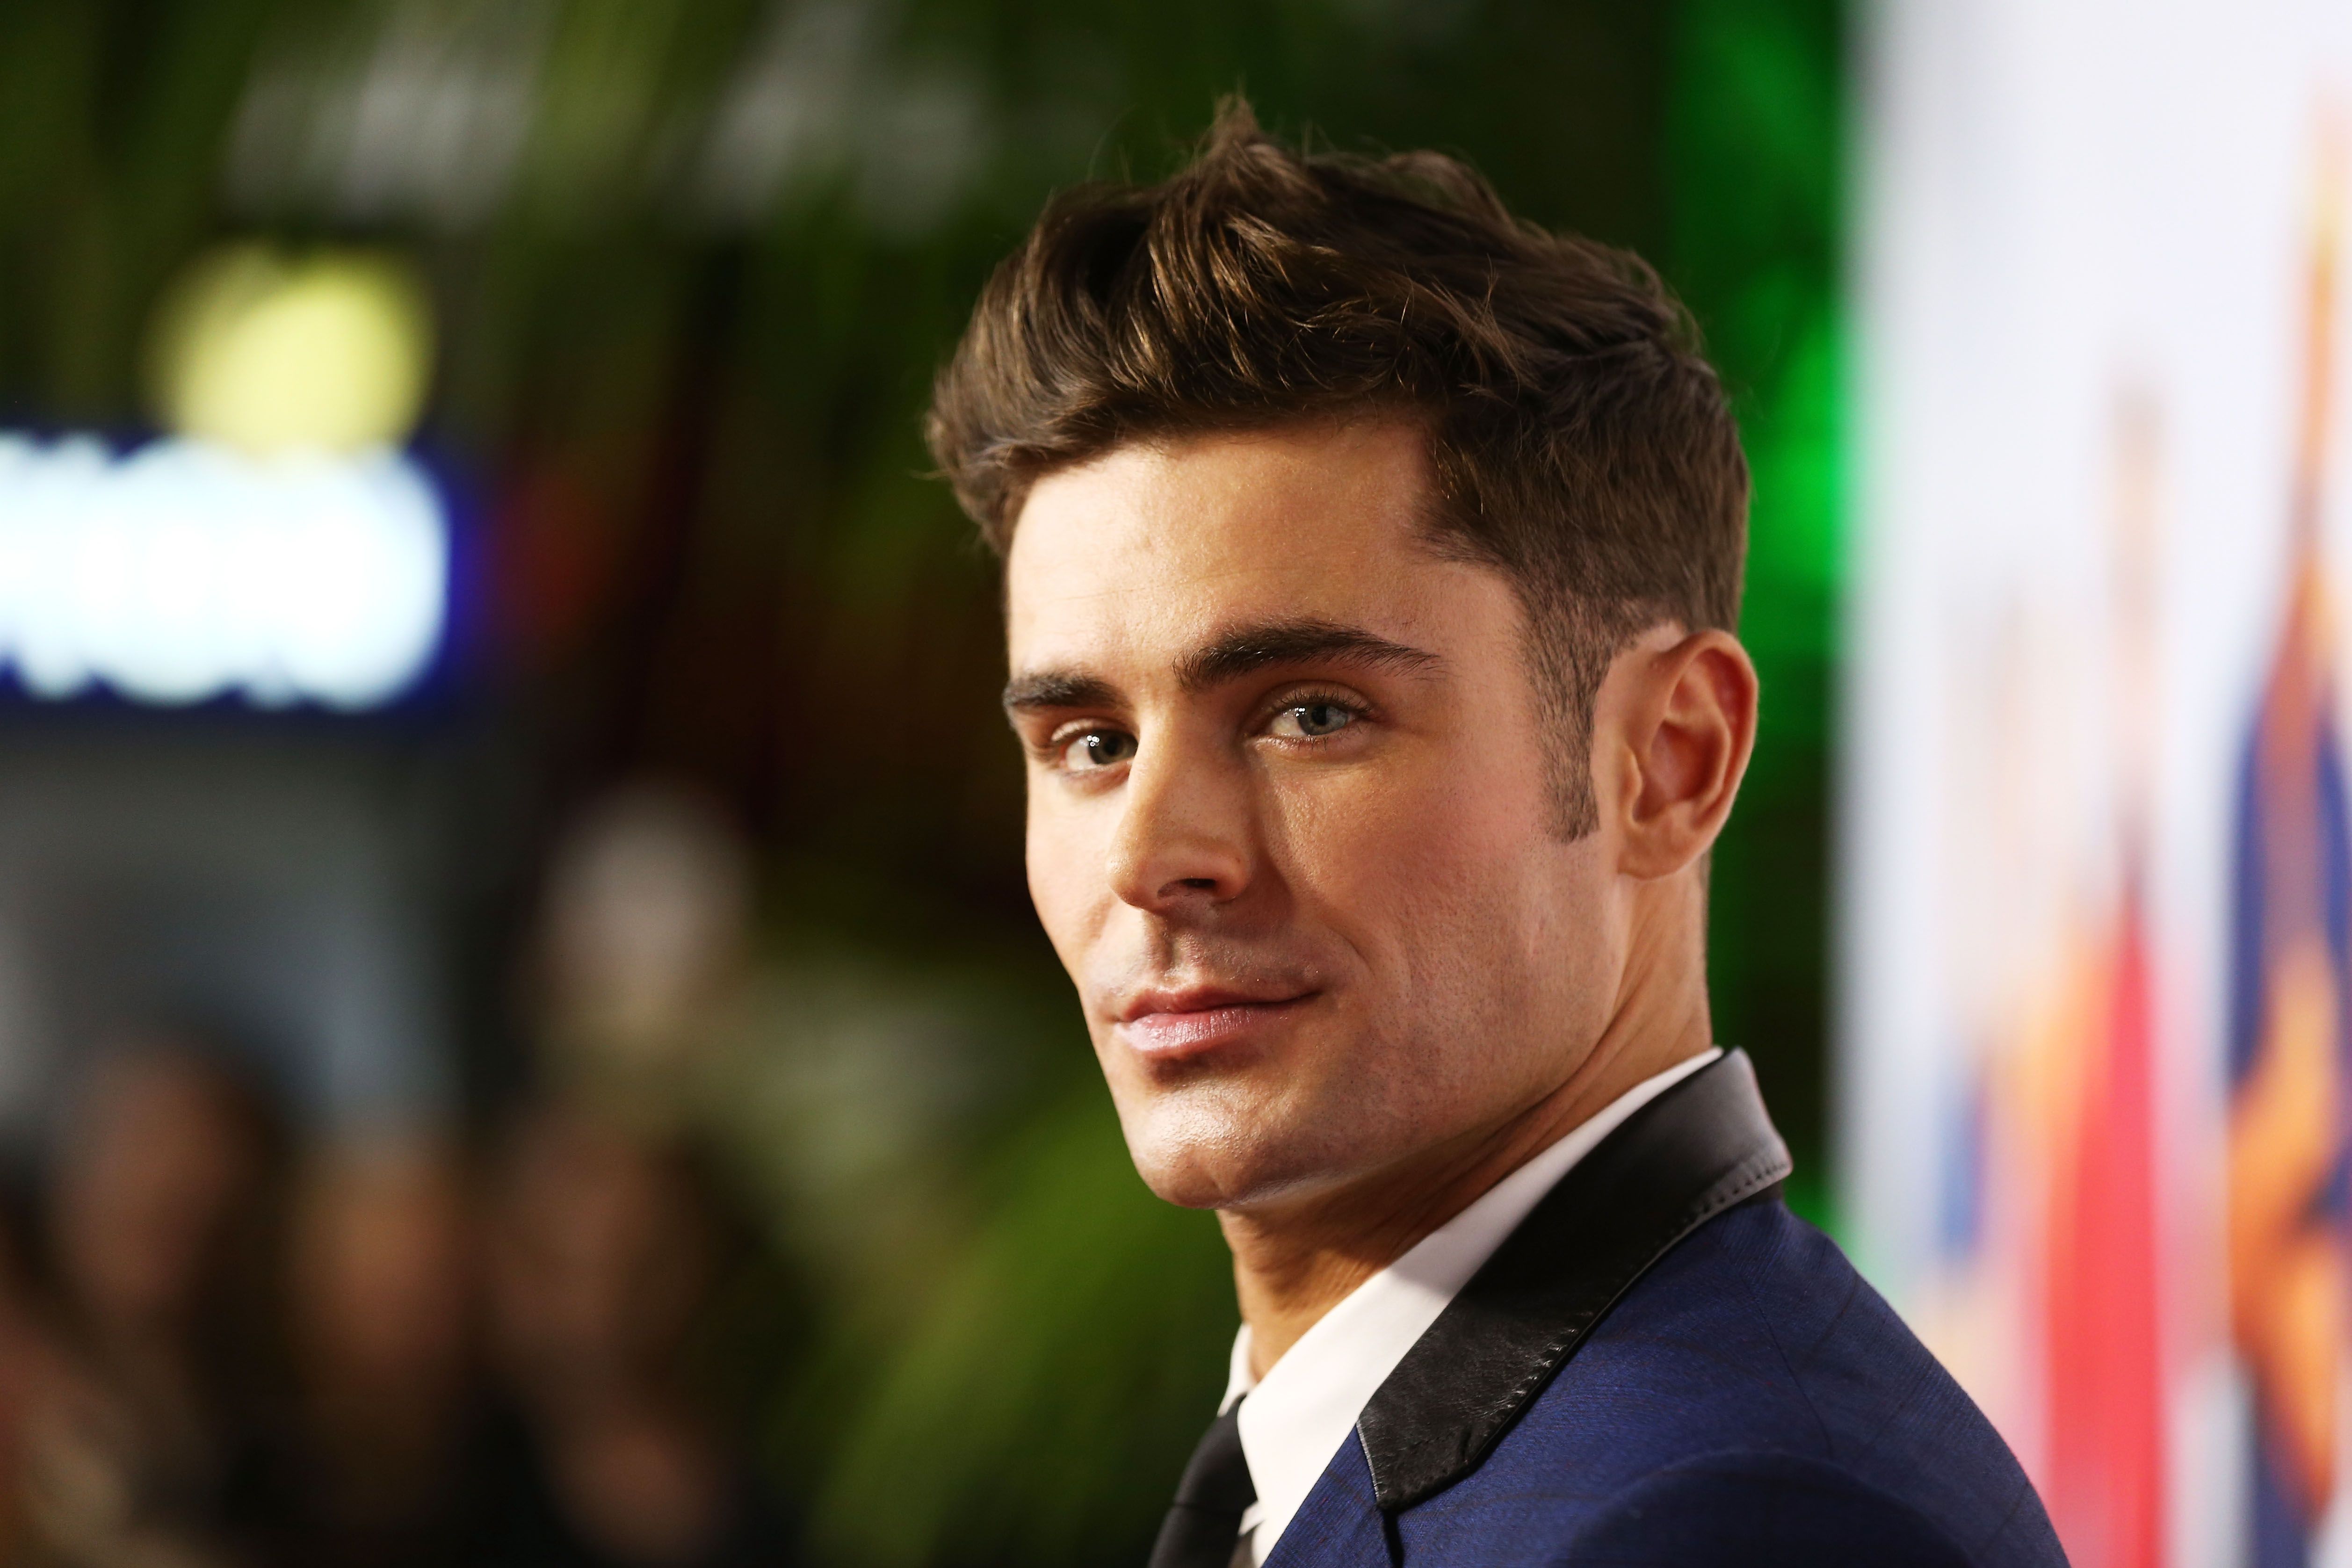 zac efron gives up his dreads - zac efron debuts new hair at